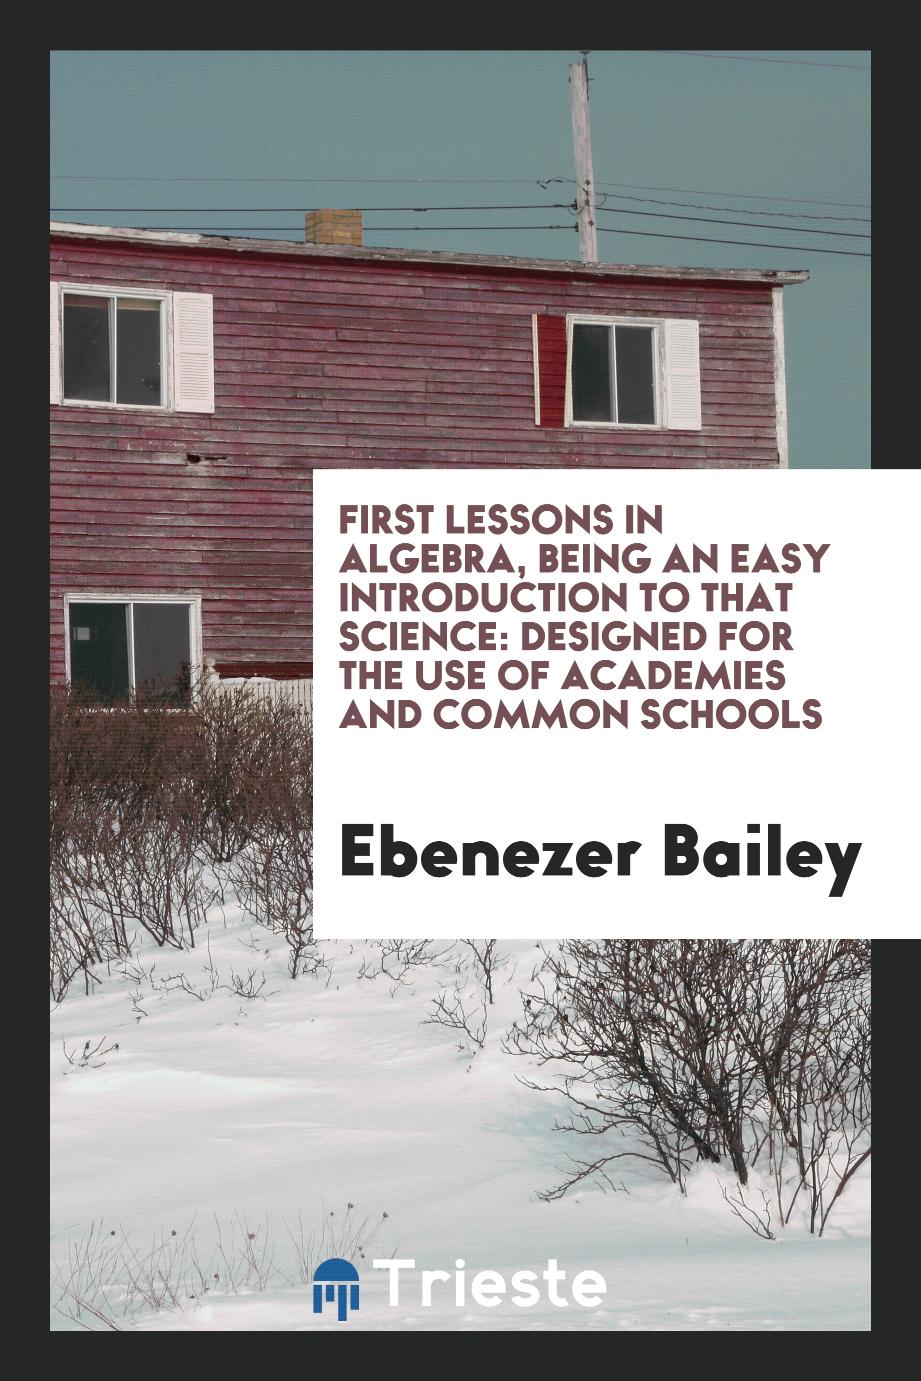 First Lessons in Algebra, Being an Easy Introduction to that Science: Designed for the use of Academies and Common Schools